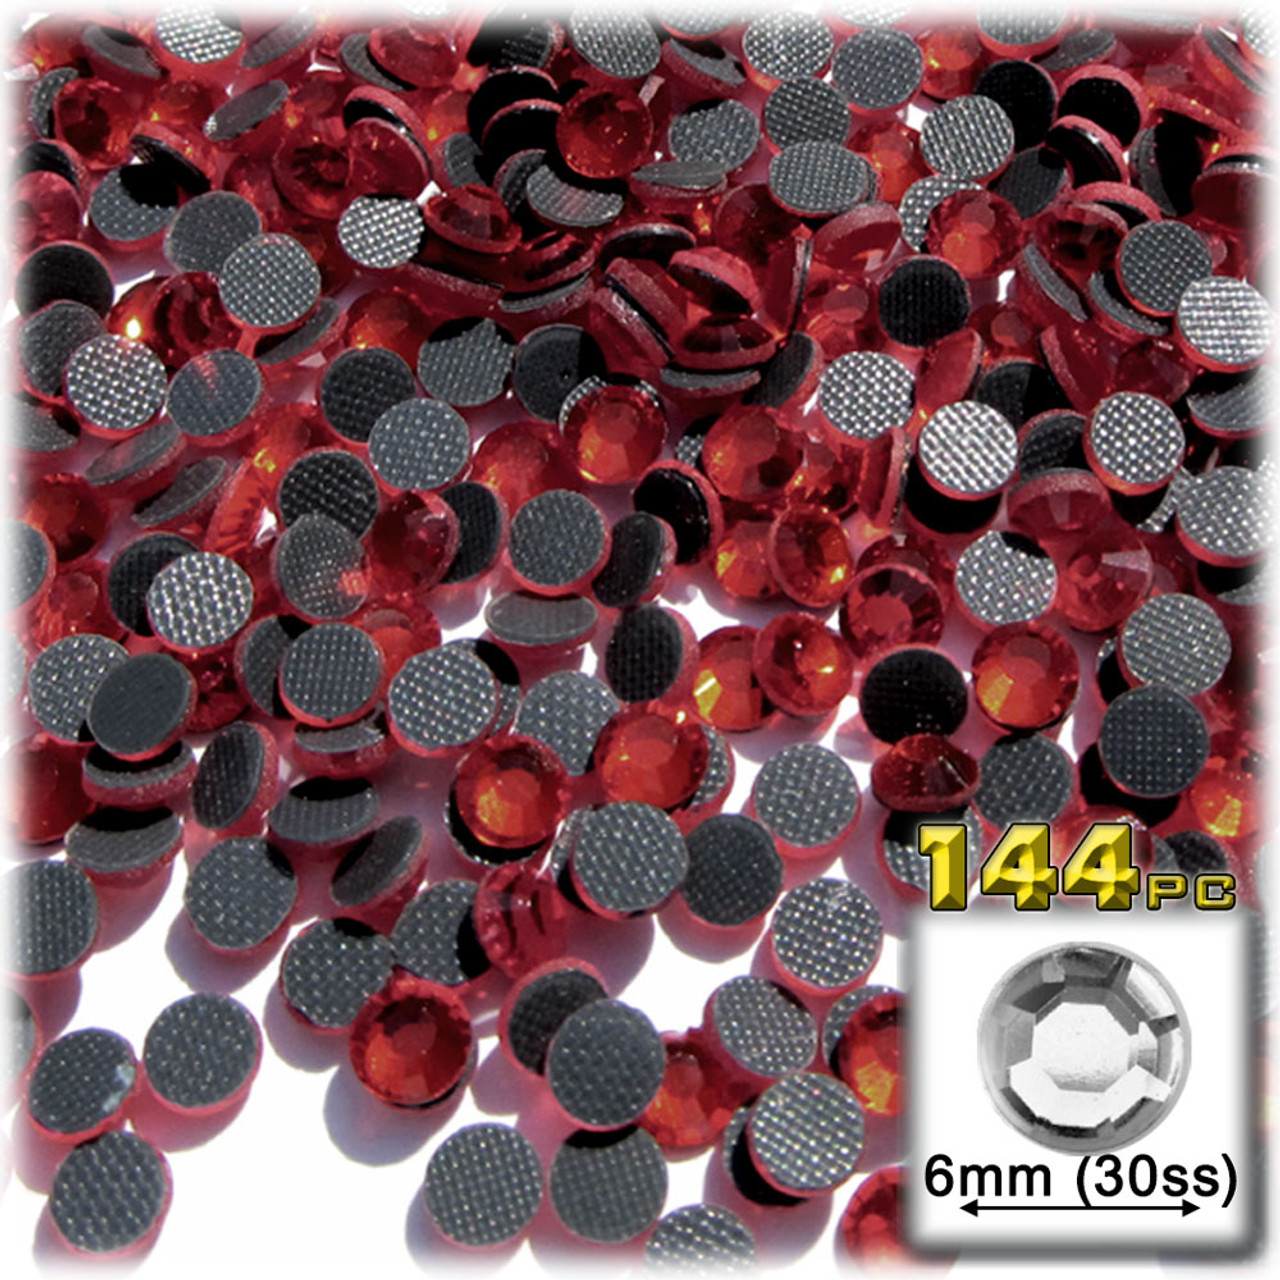 The Crafts Outlet Glass Rhinestones, Round DMC Hot-Fix, 2mm Tiny, 1440-pc, Hot Pink